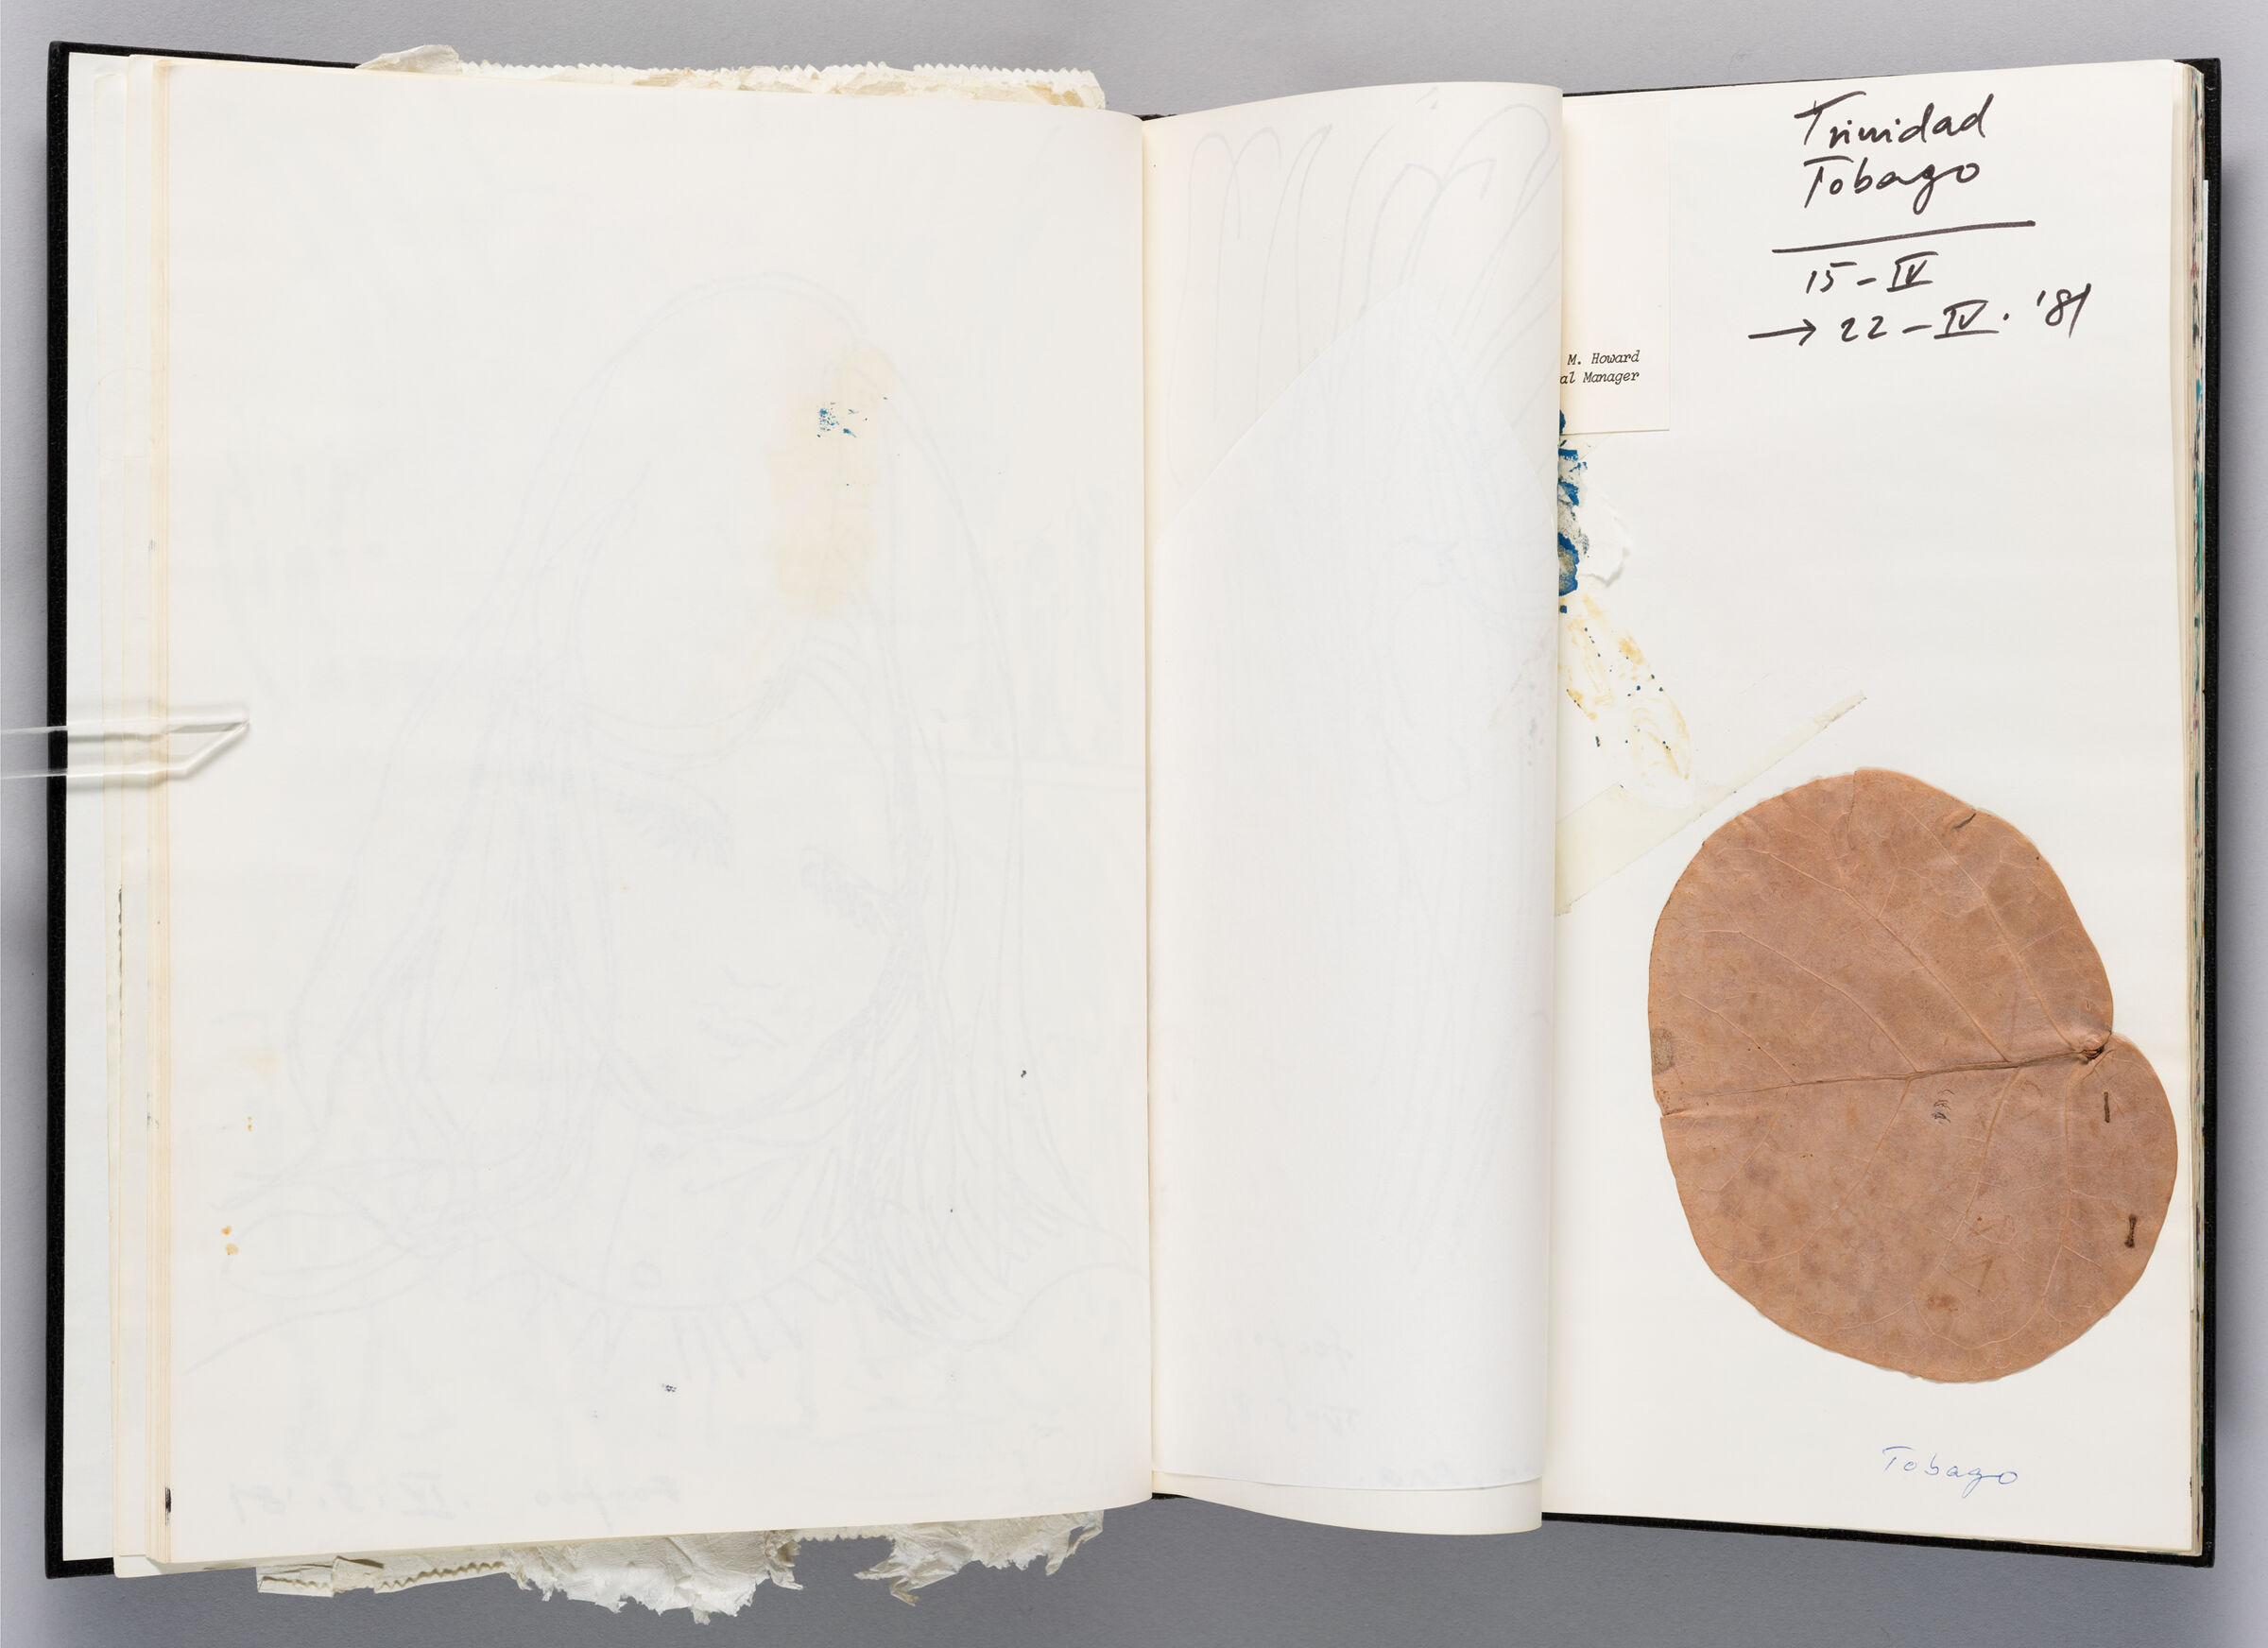 Untitled (Bleed-Through Of Previous Page, Left Page); Untitled (Note And Adhered Material, Right Page)